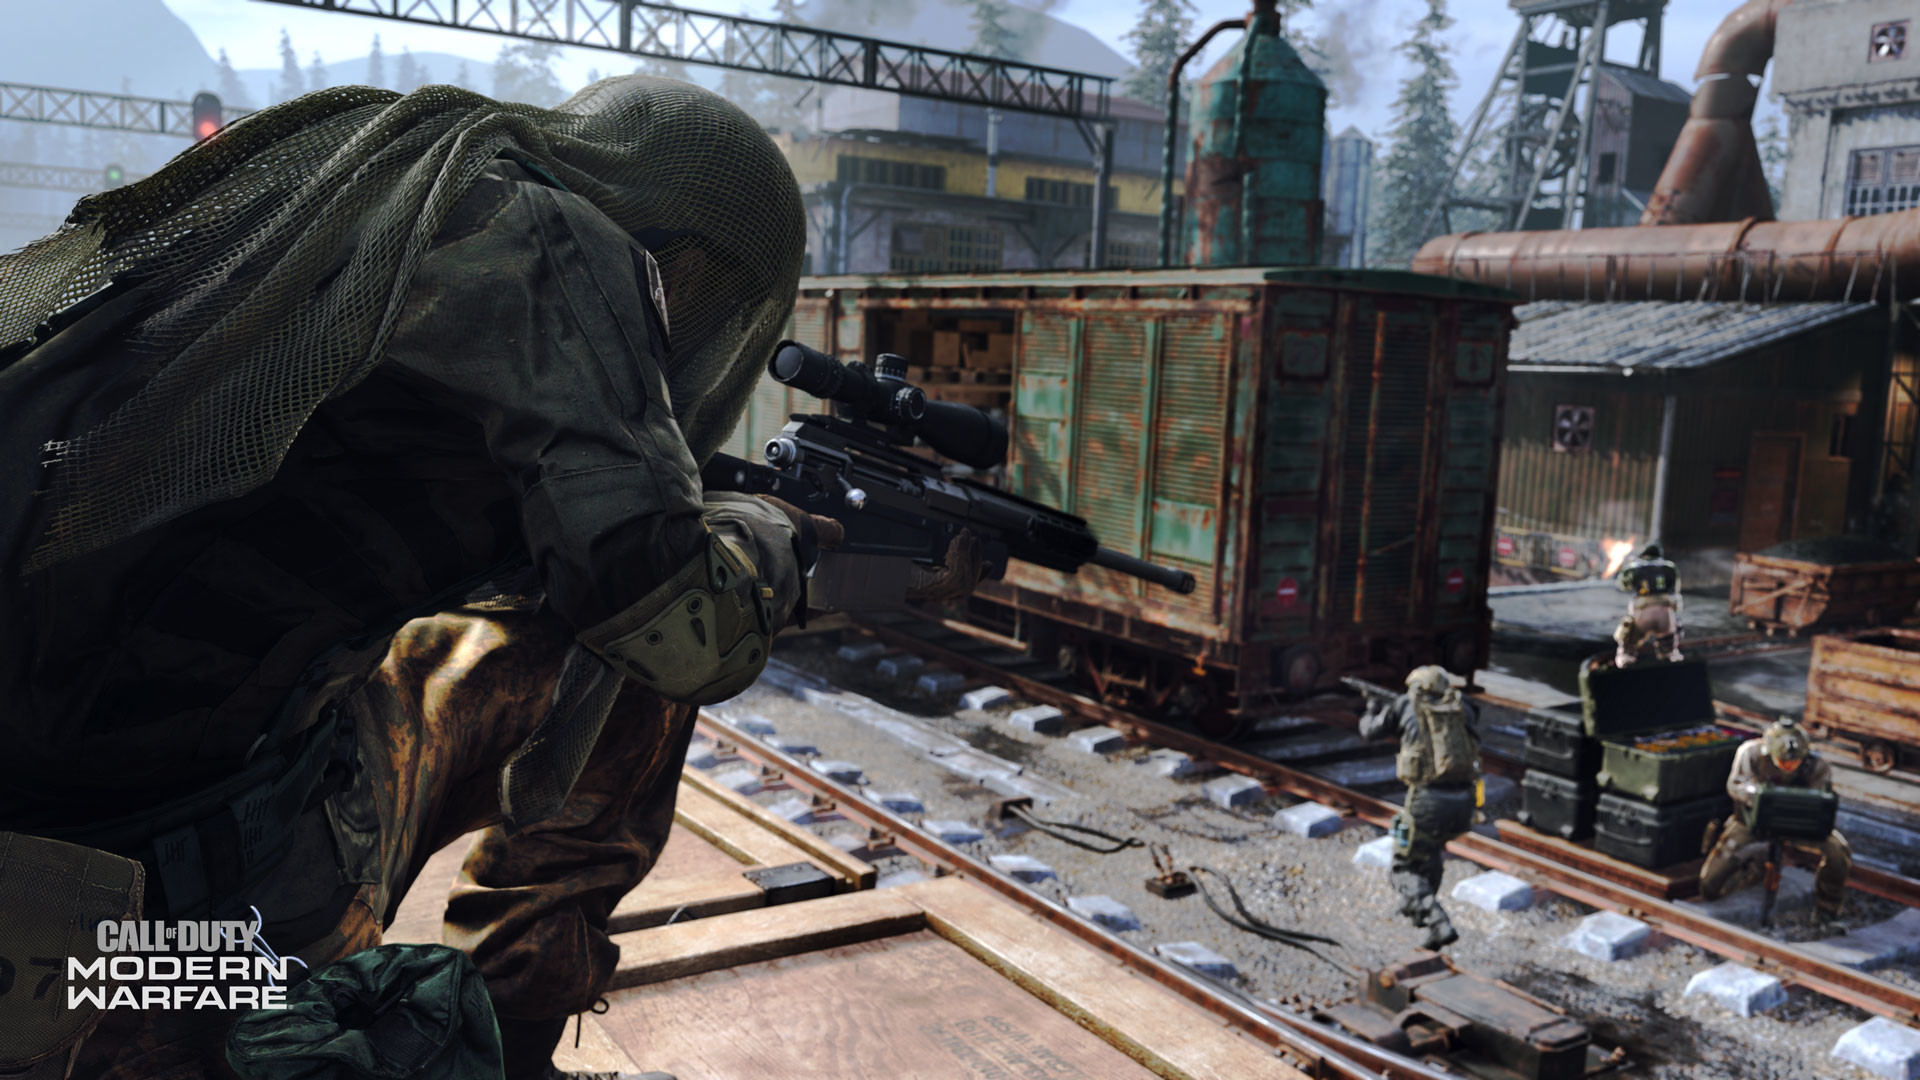 Call of Duty: Modern Warfare System Requirements